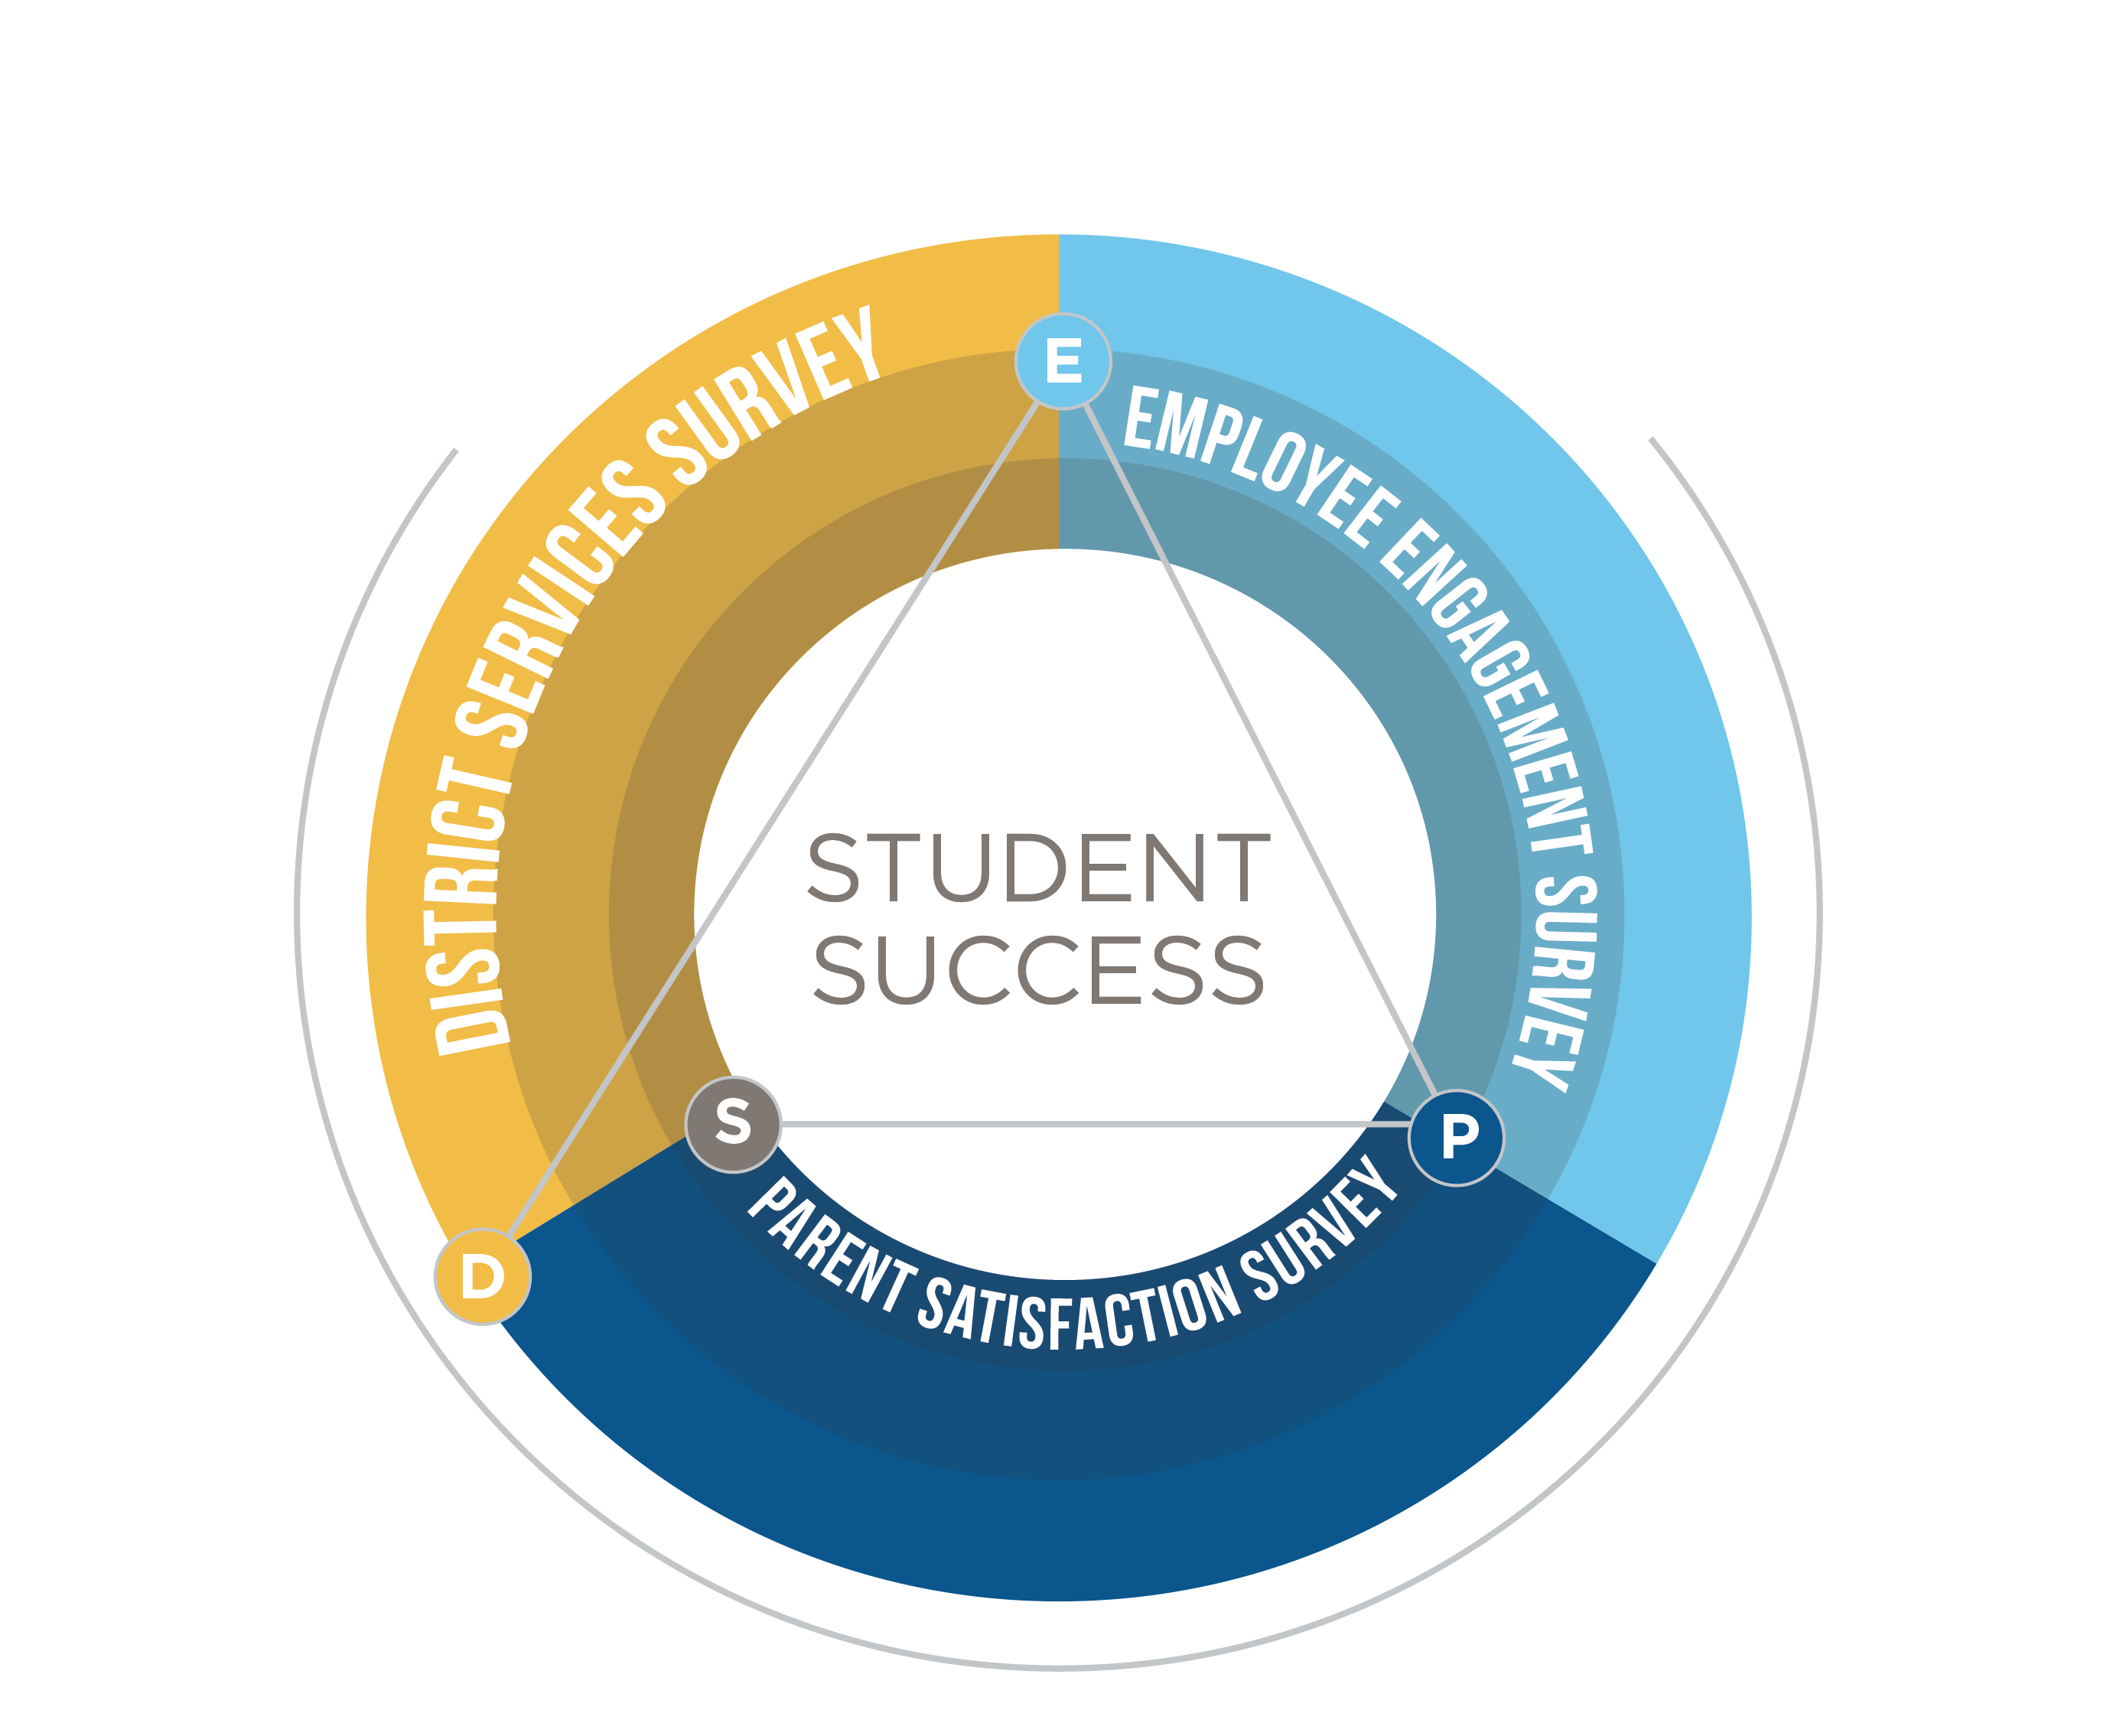 Survey Feedback System Assess, Engage, and Improve Your District